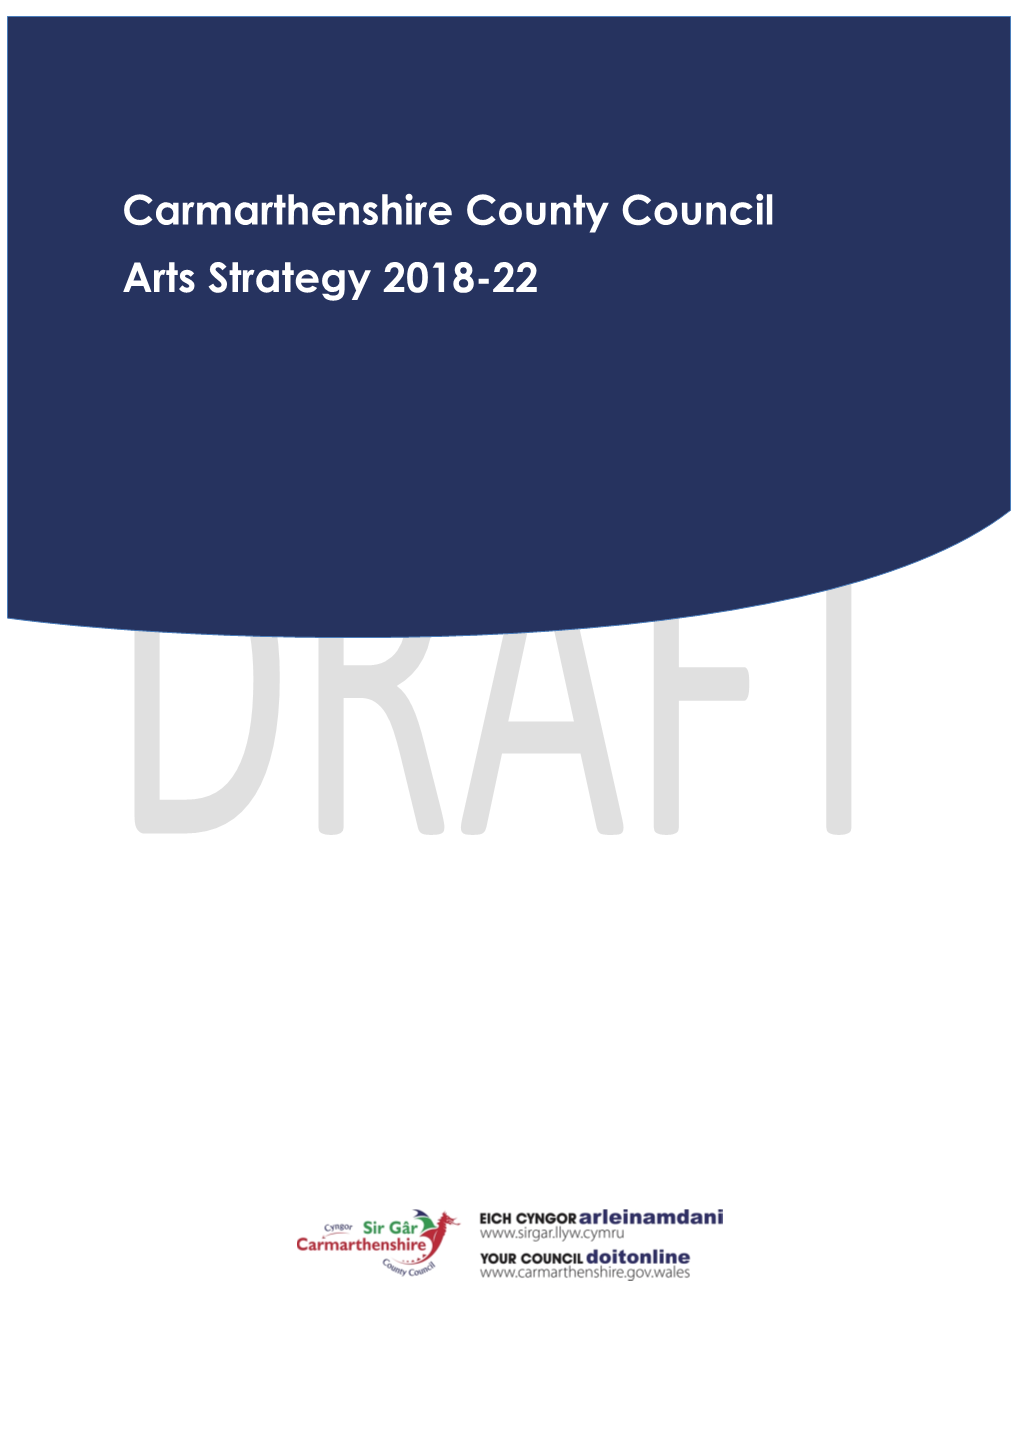 Carmarthenshire County Council Arts Strategy 2018-22 Contents